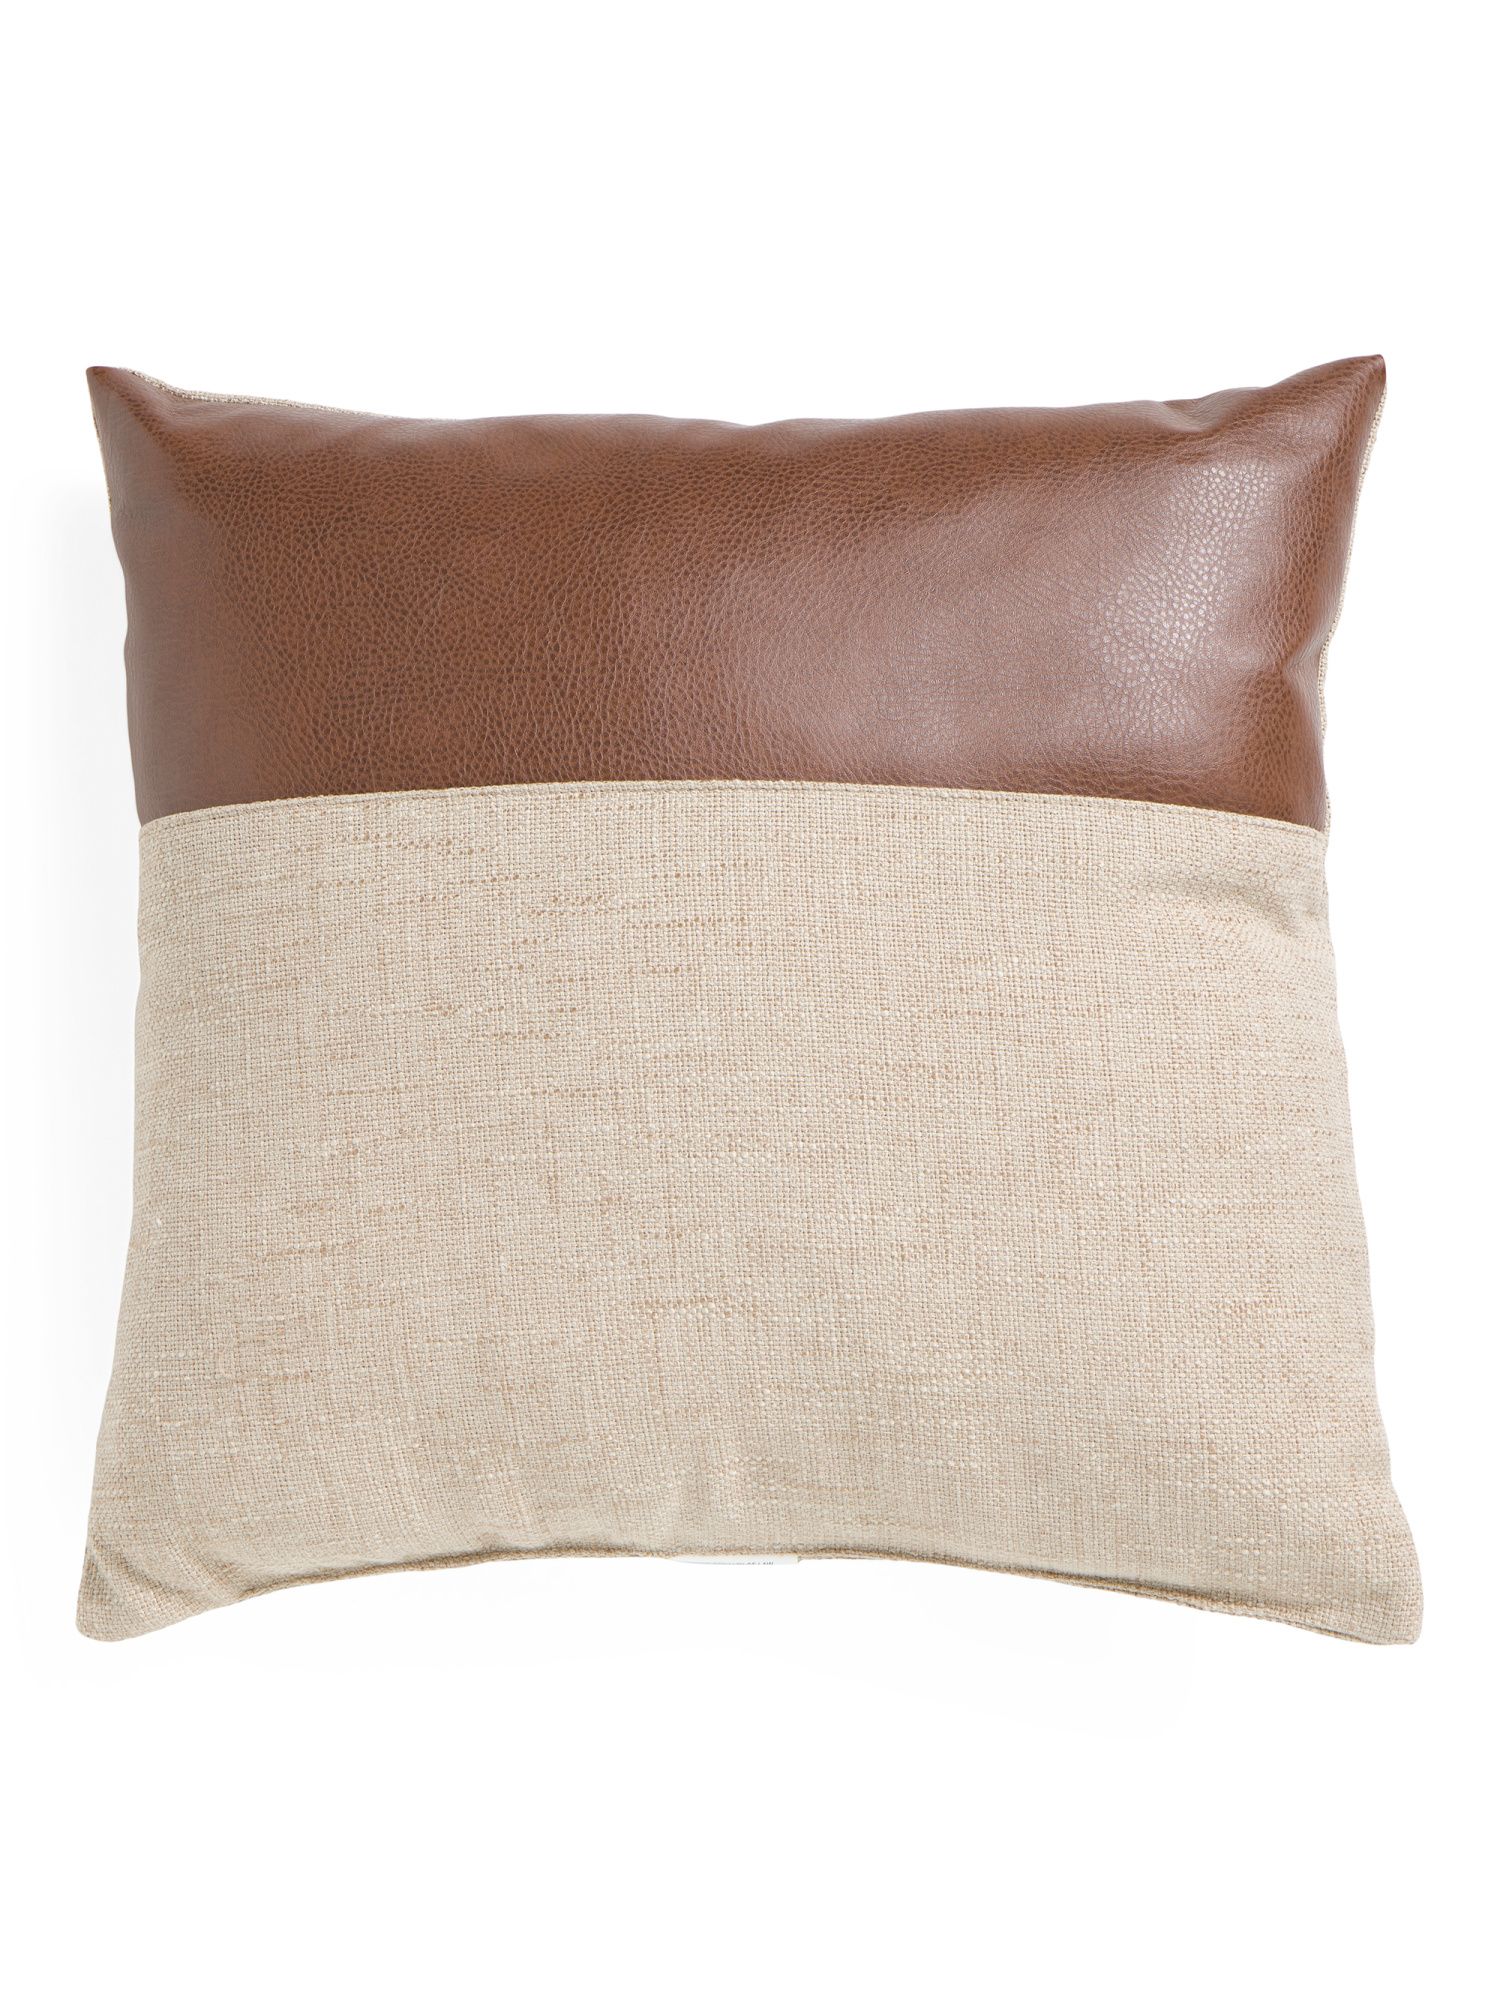 22x22 Linen And Faux Leather Pillow | Gifts For Him | Marshalls | Marshalls